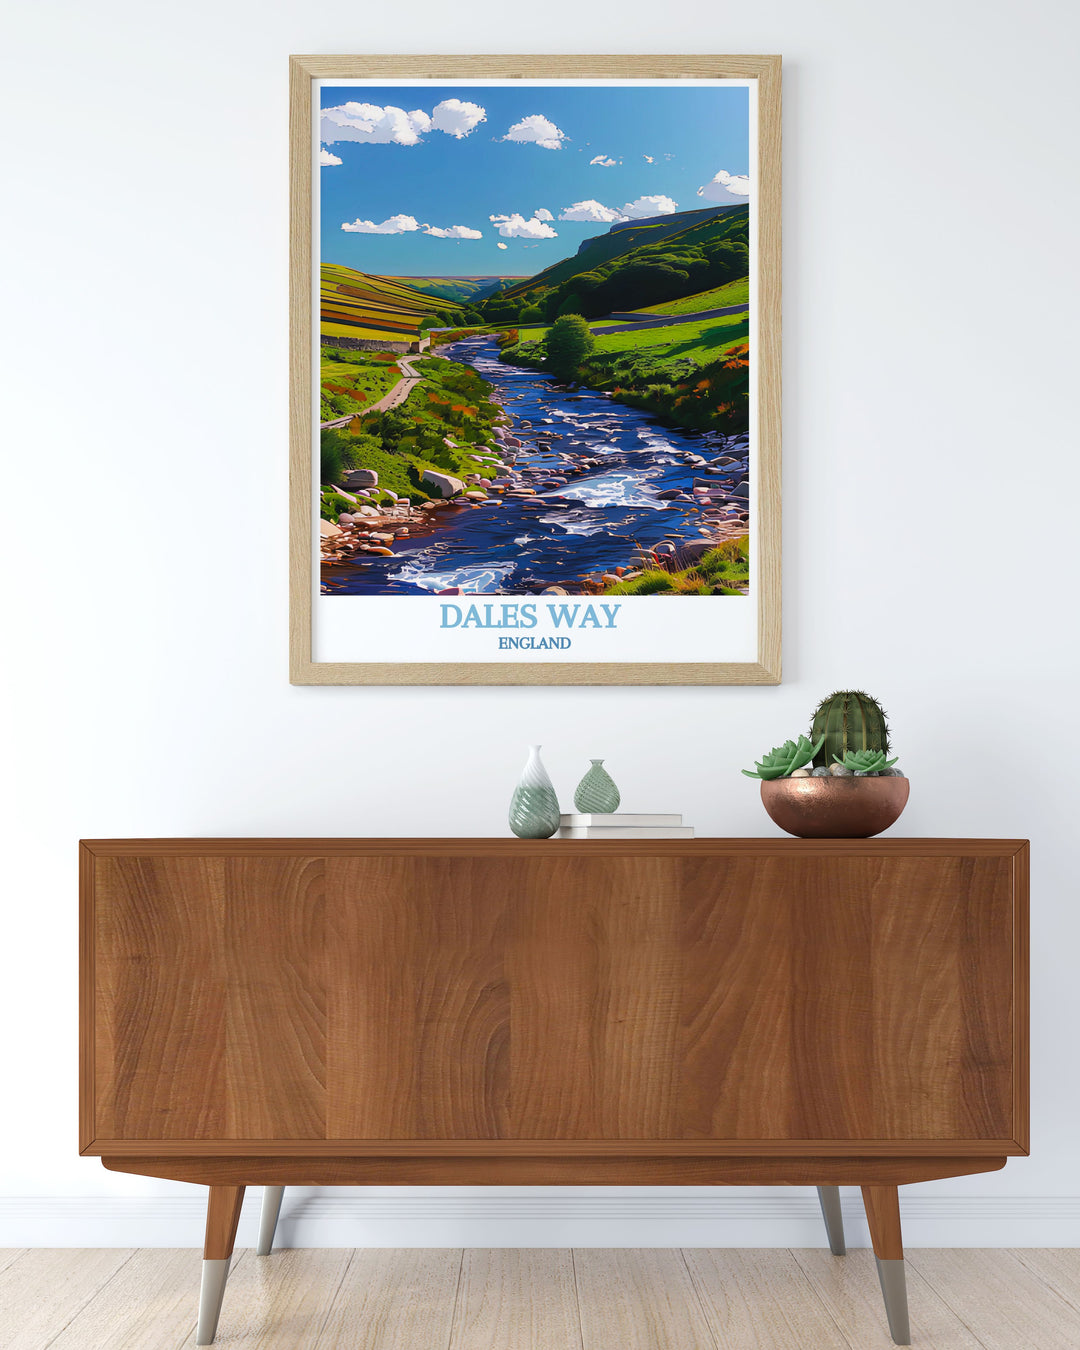 Framed art depicting the majestic landscapes of the Dales Way, showcasing the idyllic scenery and historic charm of Wharfedale.